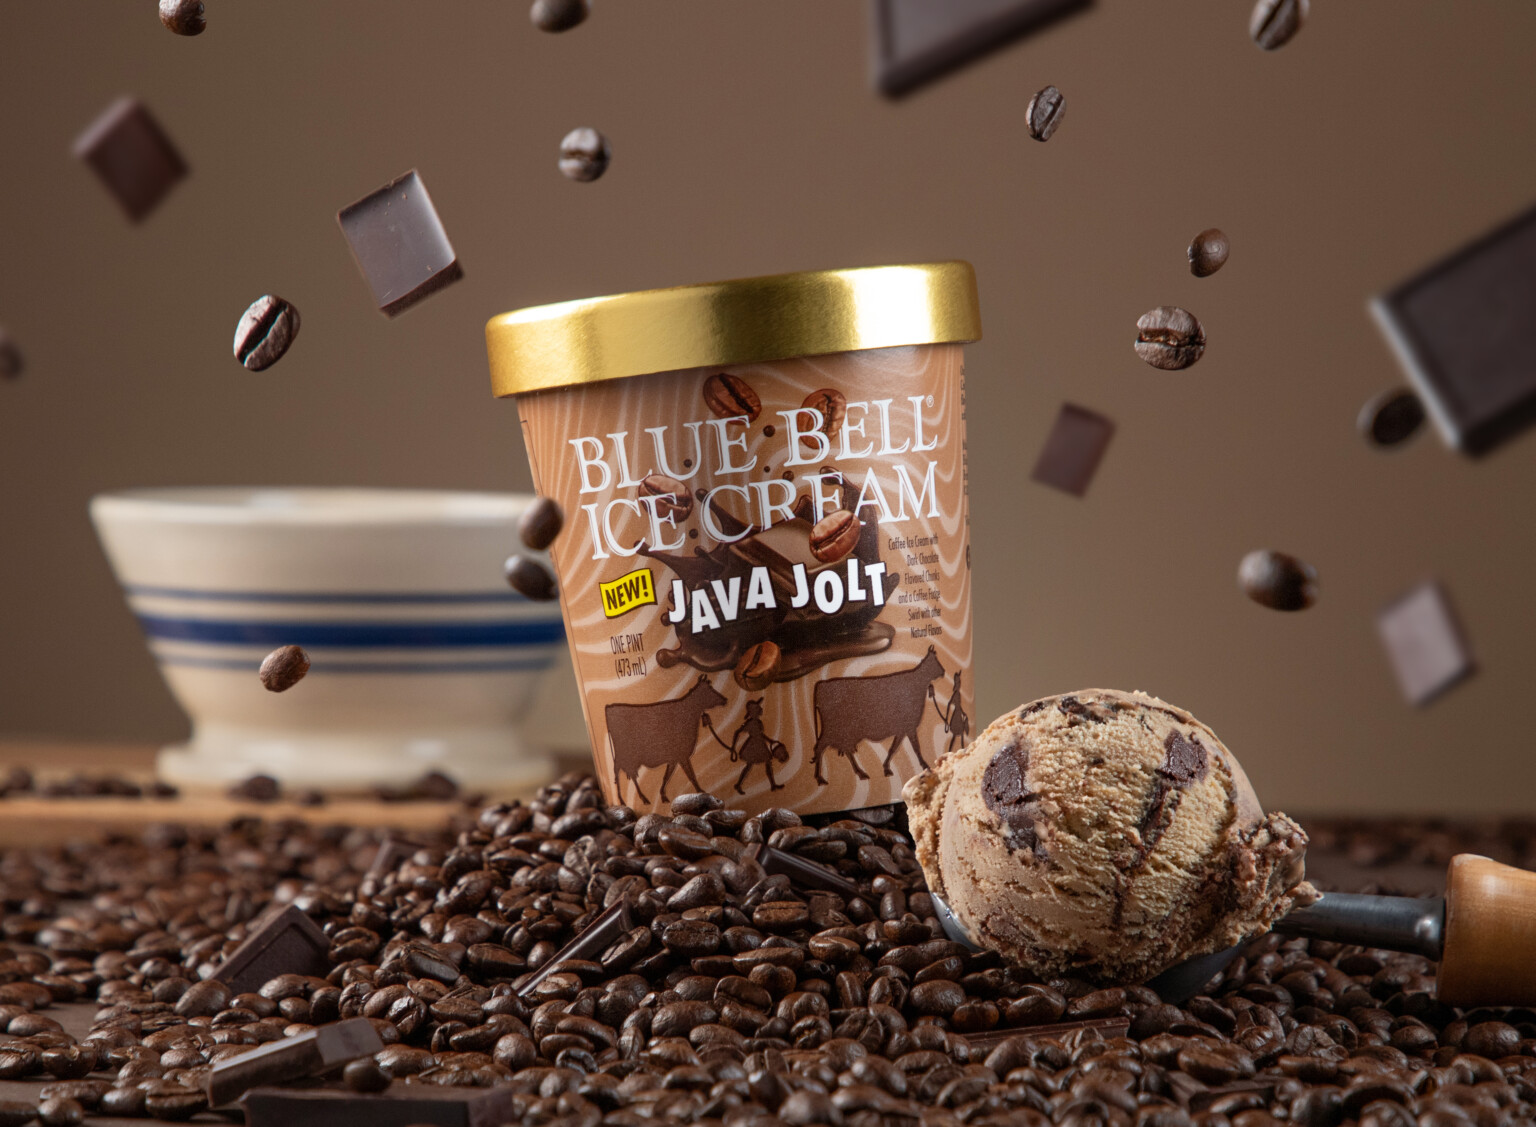 Trying Blue Bell's New Java Jolt Ice Cream WCCB Charlotte's CW